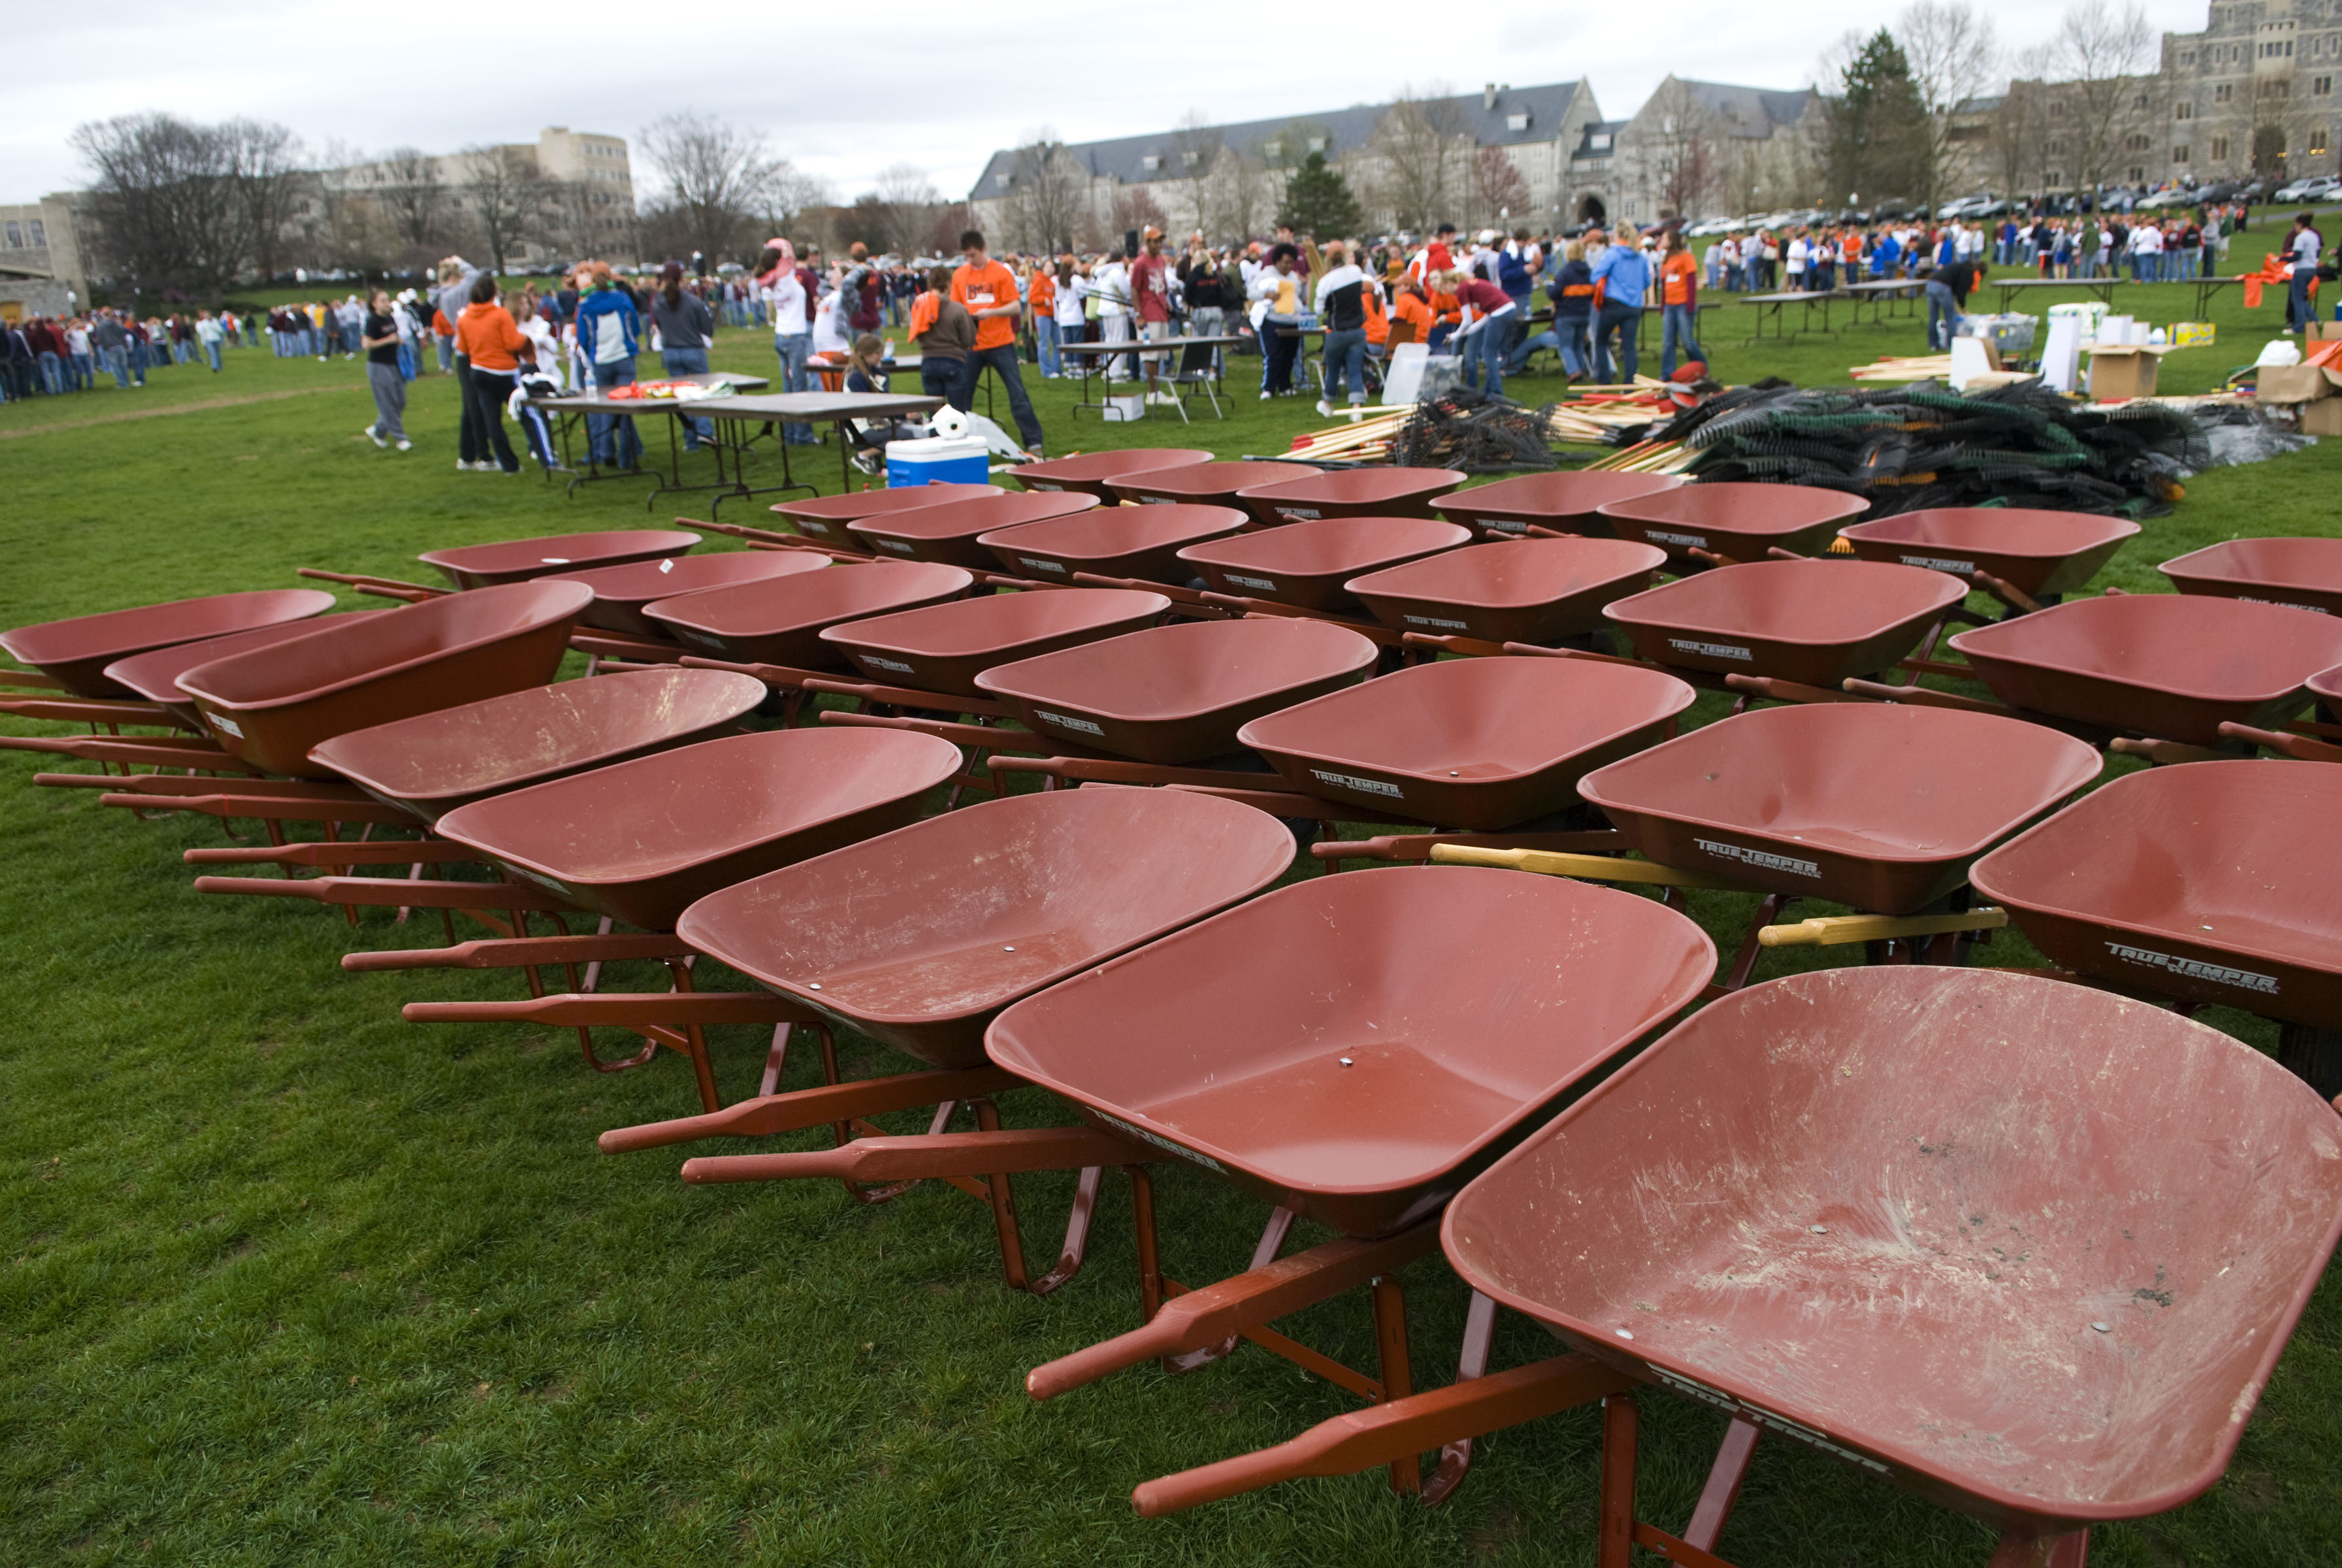 Rows of wheelbarrows line the Drillfield as volunteers gather for the 2008 Big Event.